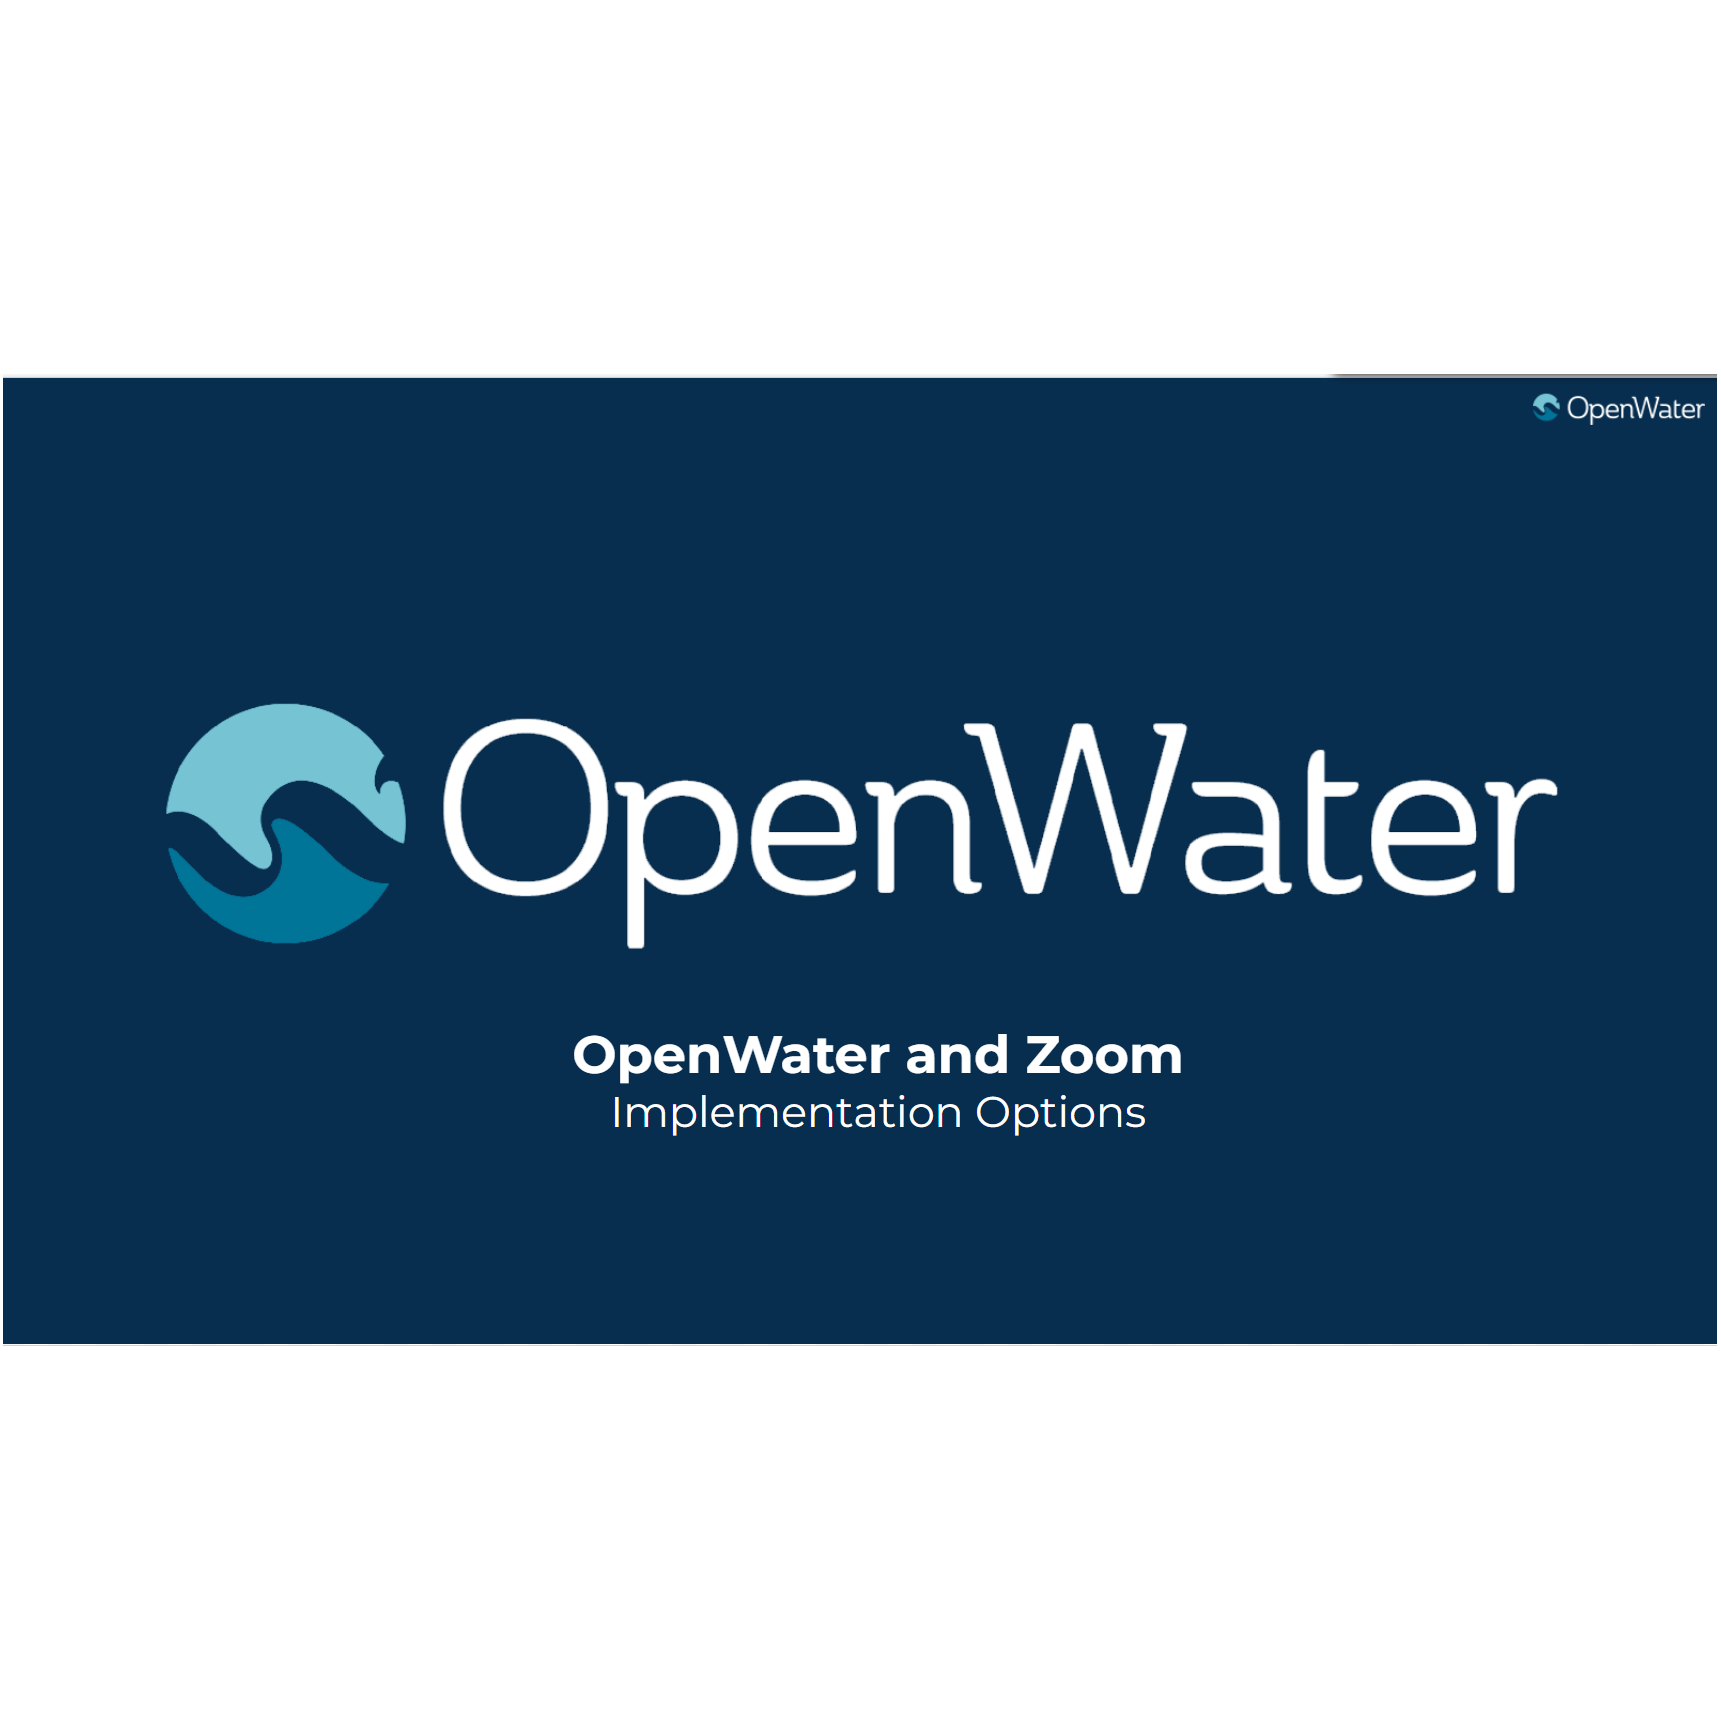 OpenWater + Zoom Overview